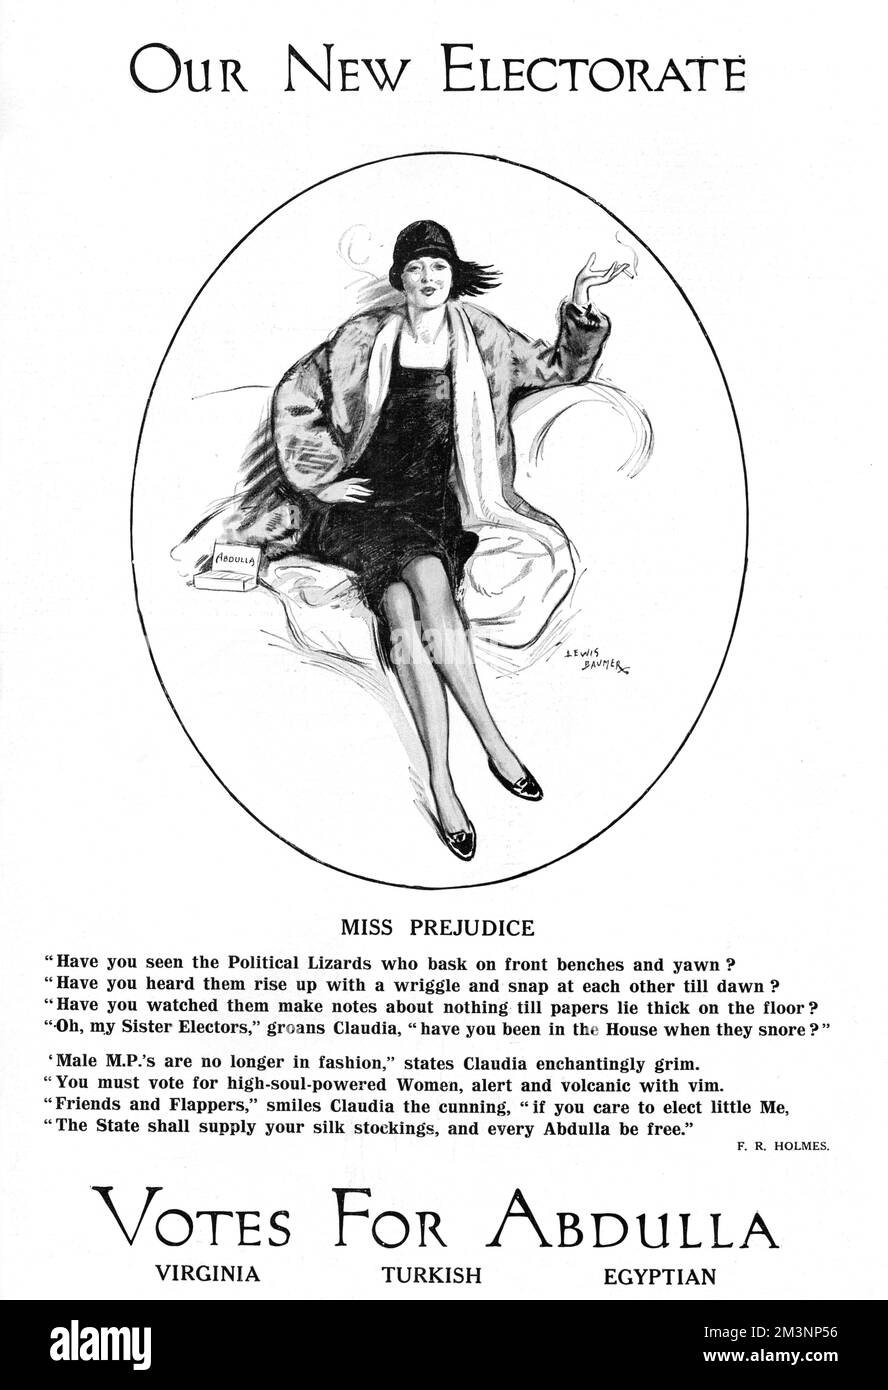 A young lady named Claudia reclines in a sofa, smoking an Abdulla's cigarette. The poem underneath (F. R. Holmes) engages with one of the political questions of the day, that of the recent introduction of universal suffrage (1928), meaning women were elligible to vote in forthcoming elections.      Date: 1929 Stock Photo